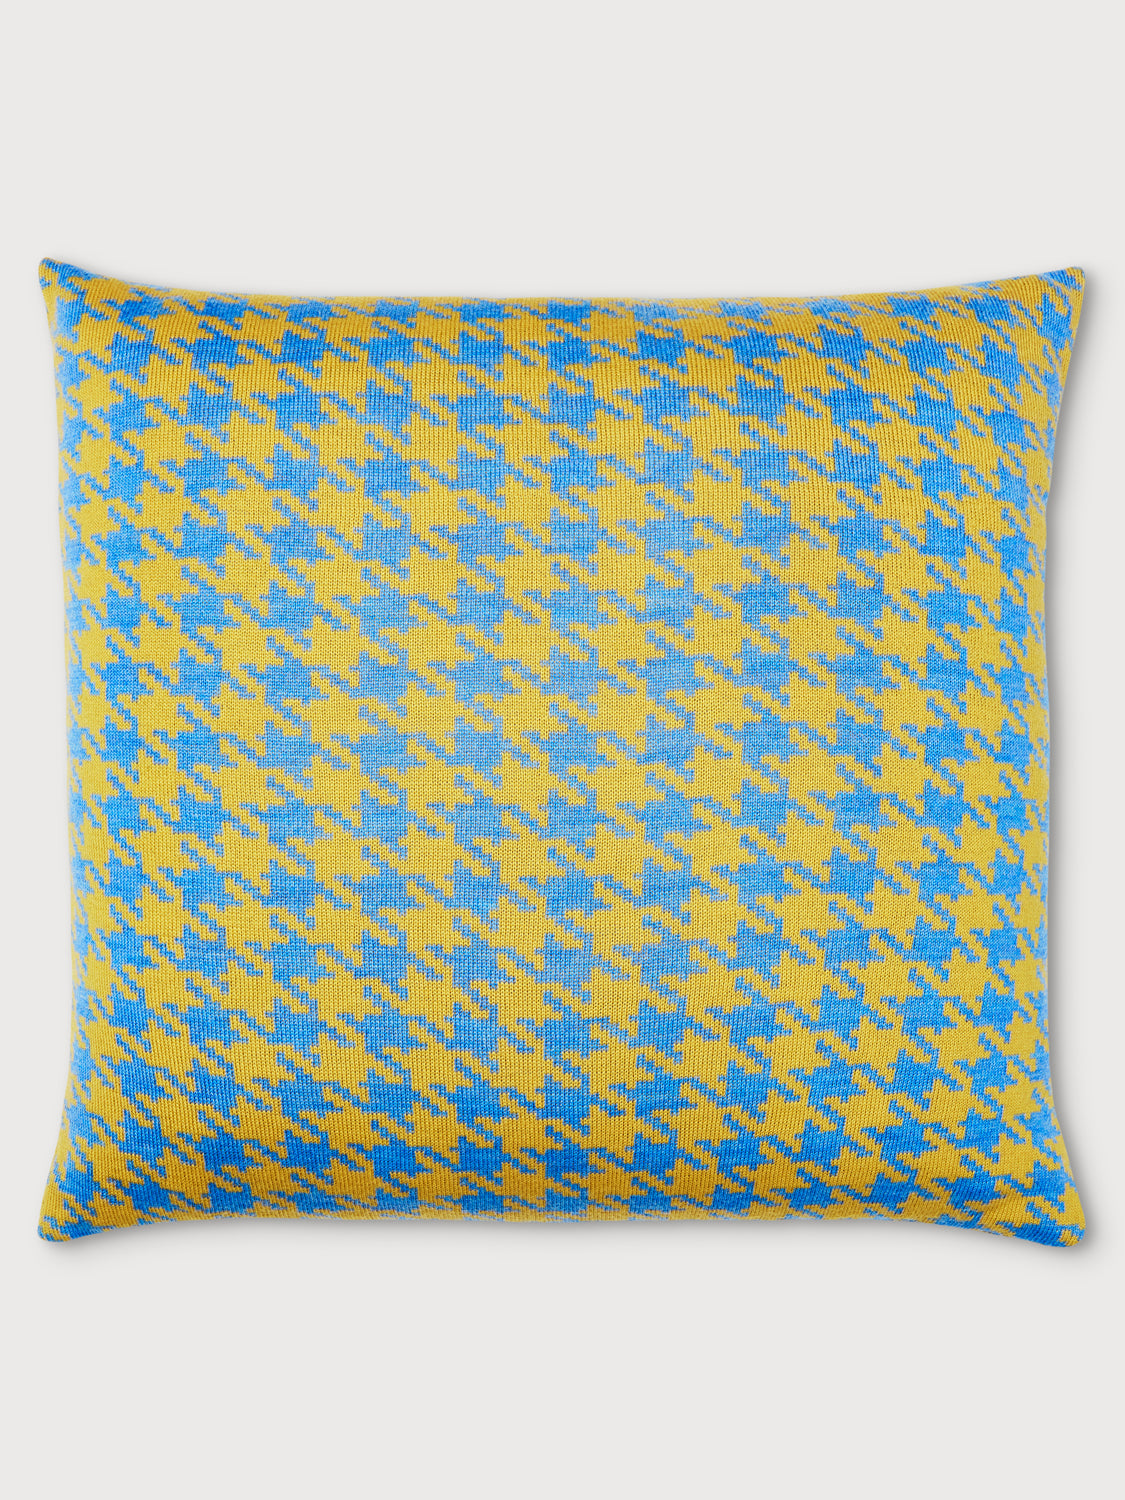 Houndstooth Baby Blue and Sunflower Yellow Cushion